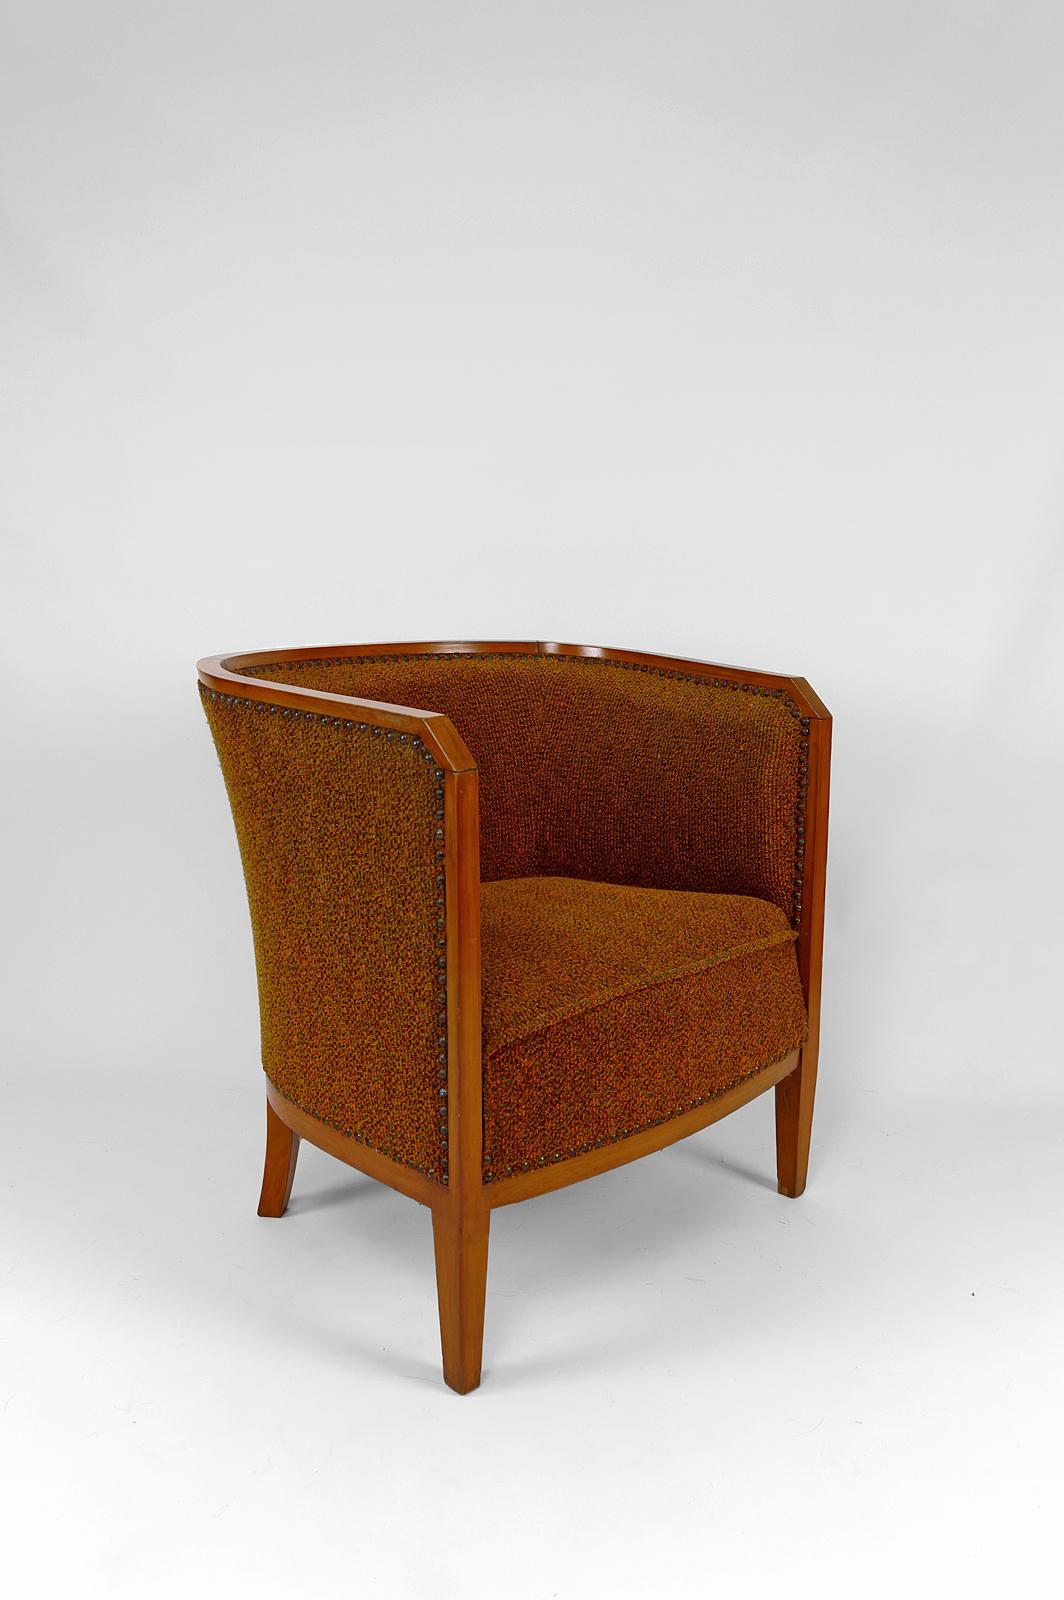 Art Deco armchair, France, circa 1925

Original “chenille”/thick velvet fabric.

Beech wood structure.
In good condition.

Dimensions:
height 74 cm
width 70 cm
depth 64 cm

Seat dimensions: height 40 cm, width 50 cm, depth 48 cm